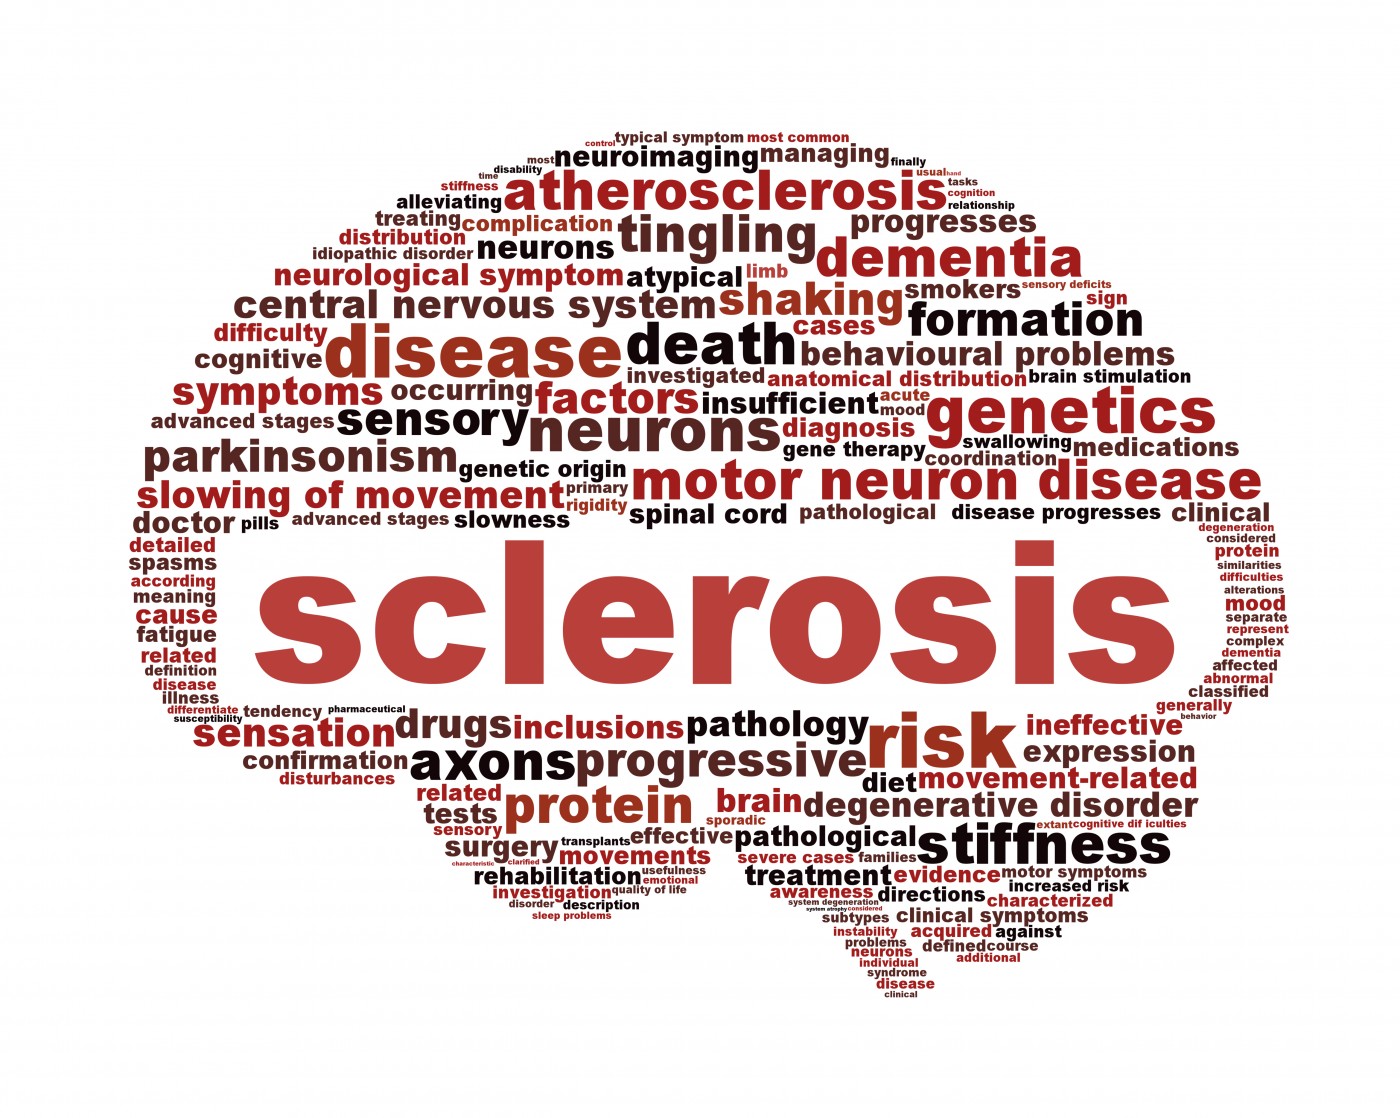 sclerosis